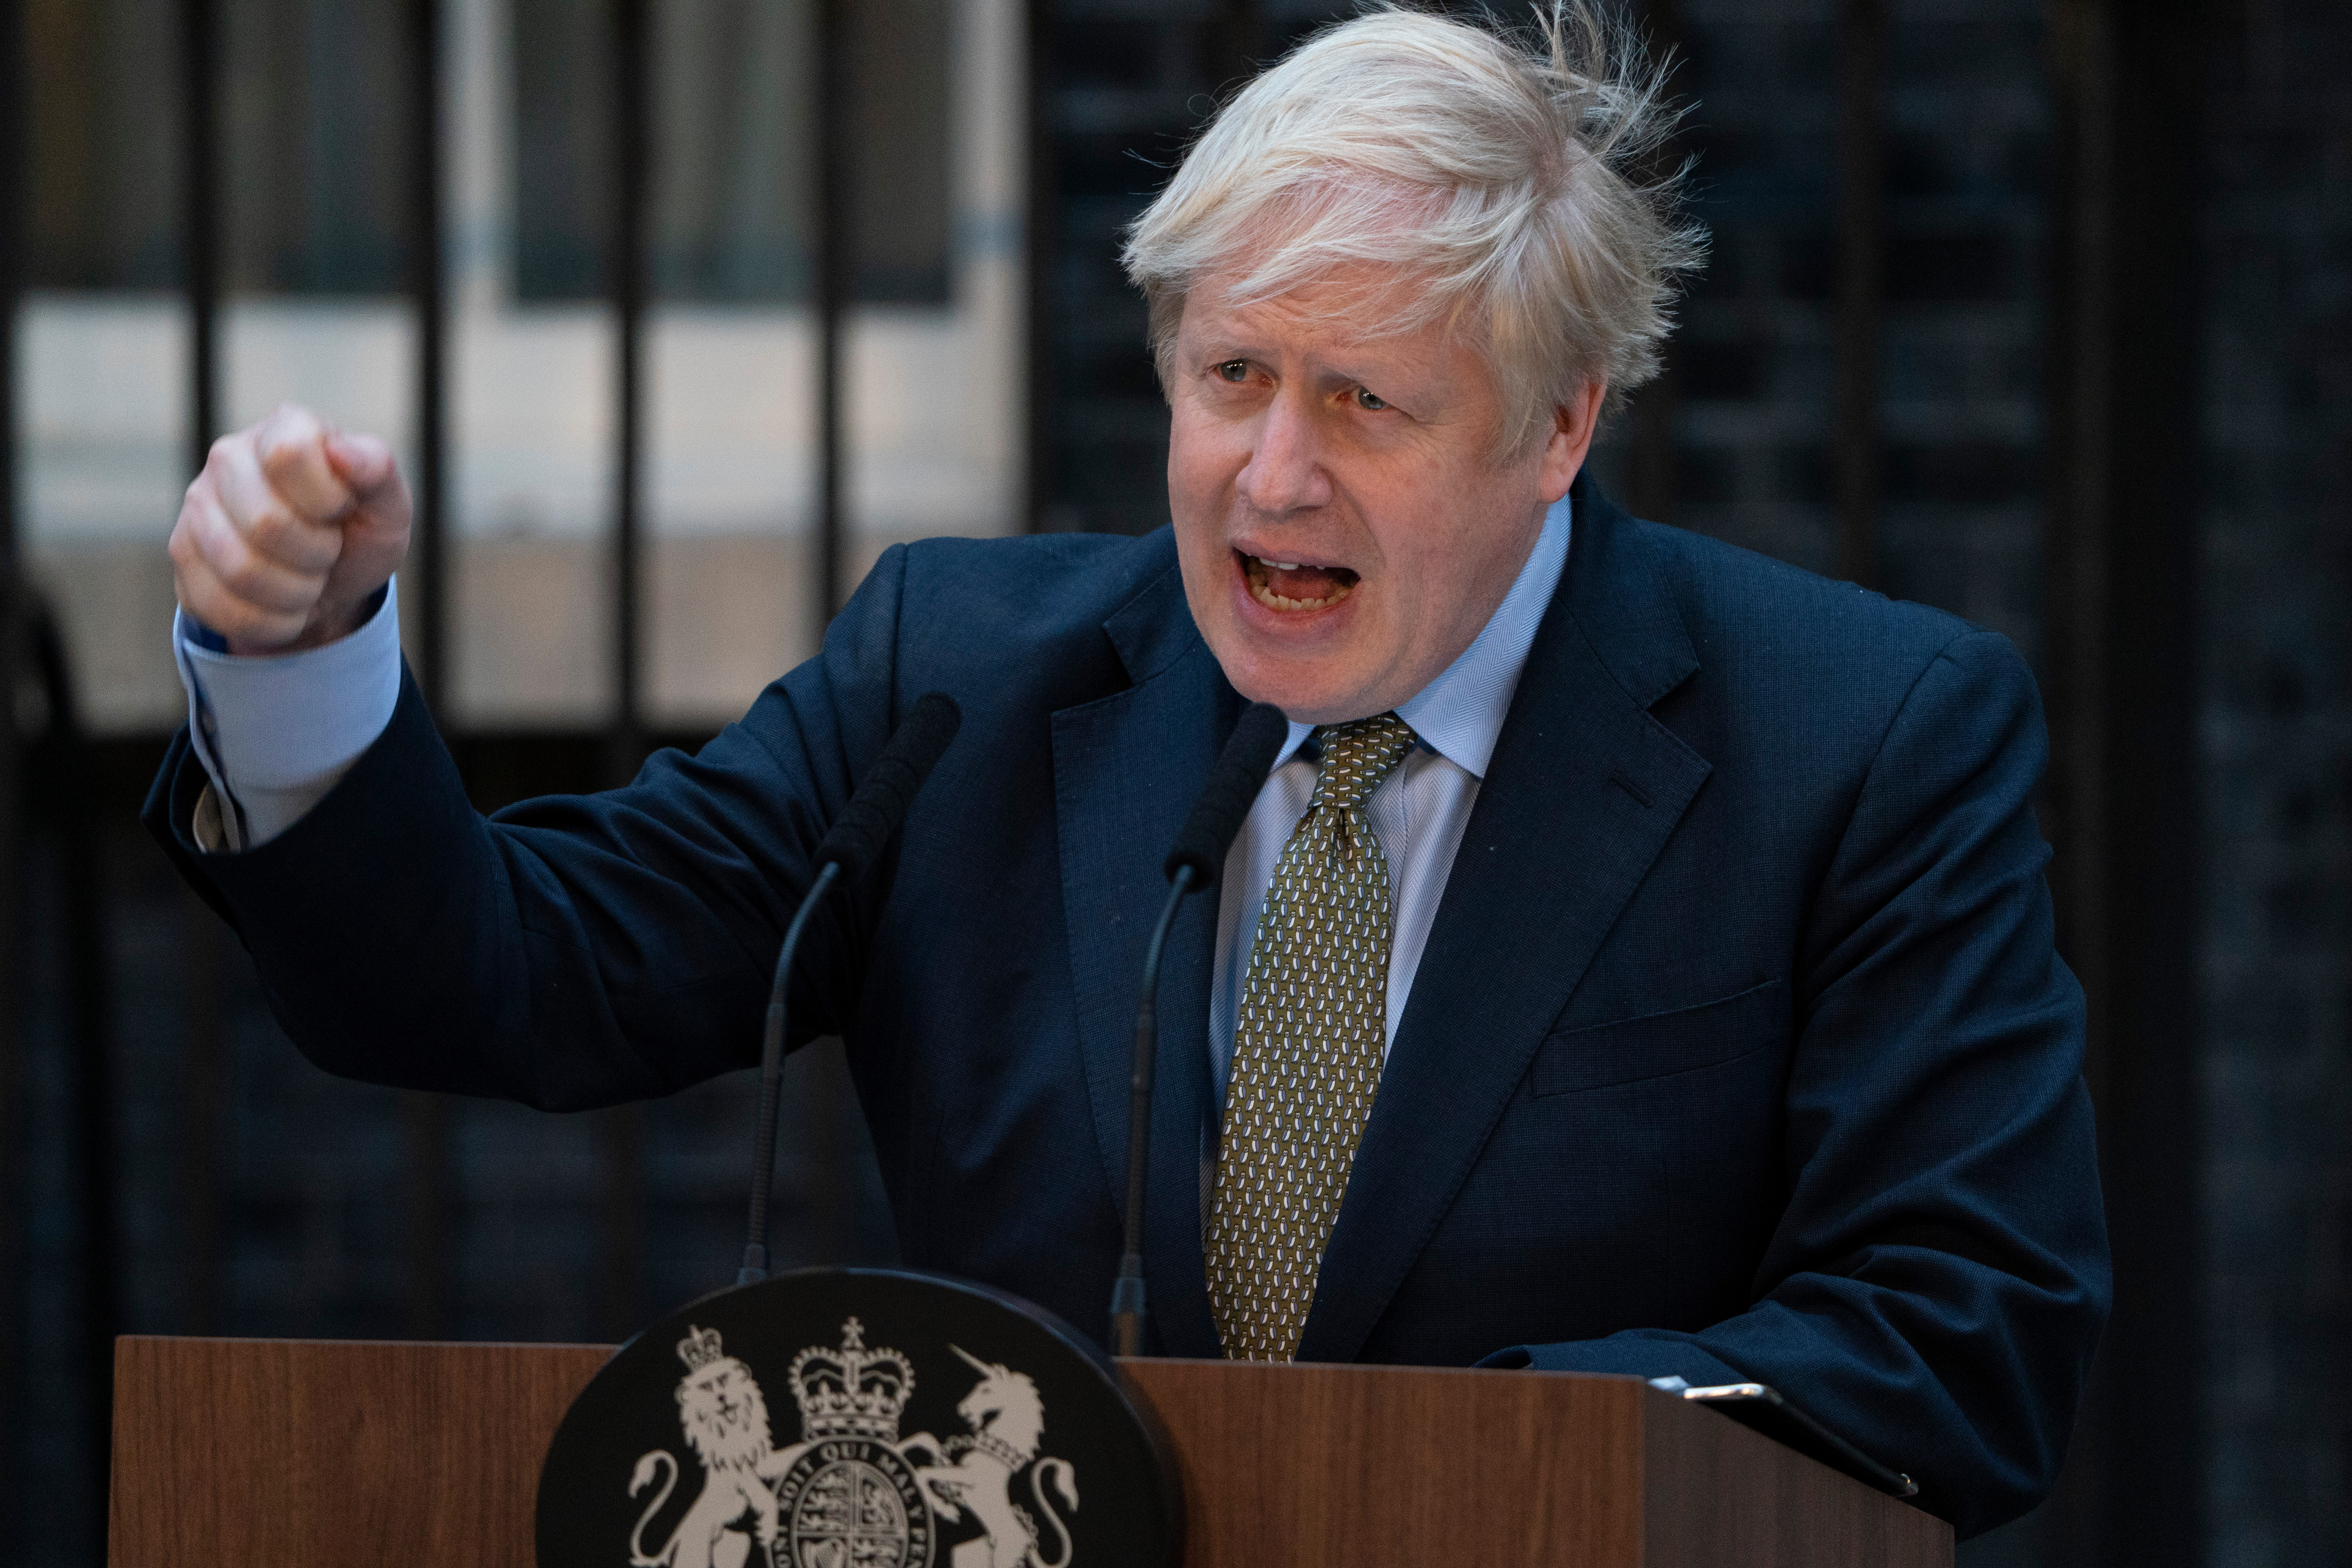  Boris Johnson plans to give British judges the power to overturn EU court rulings in his landmark Brexit bill